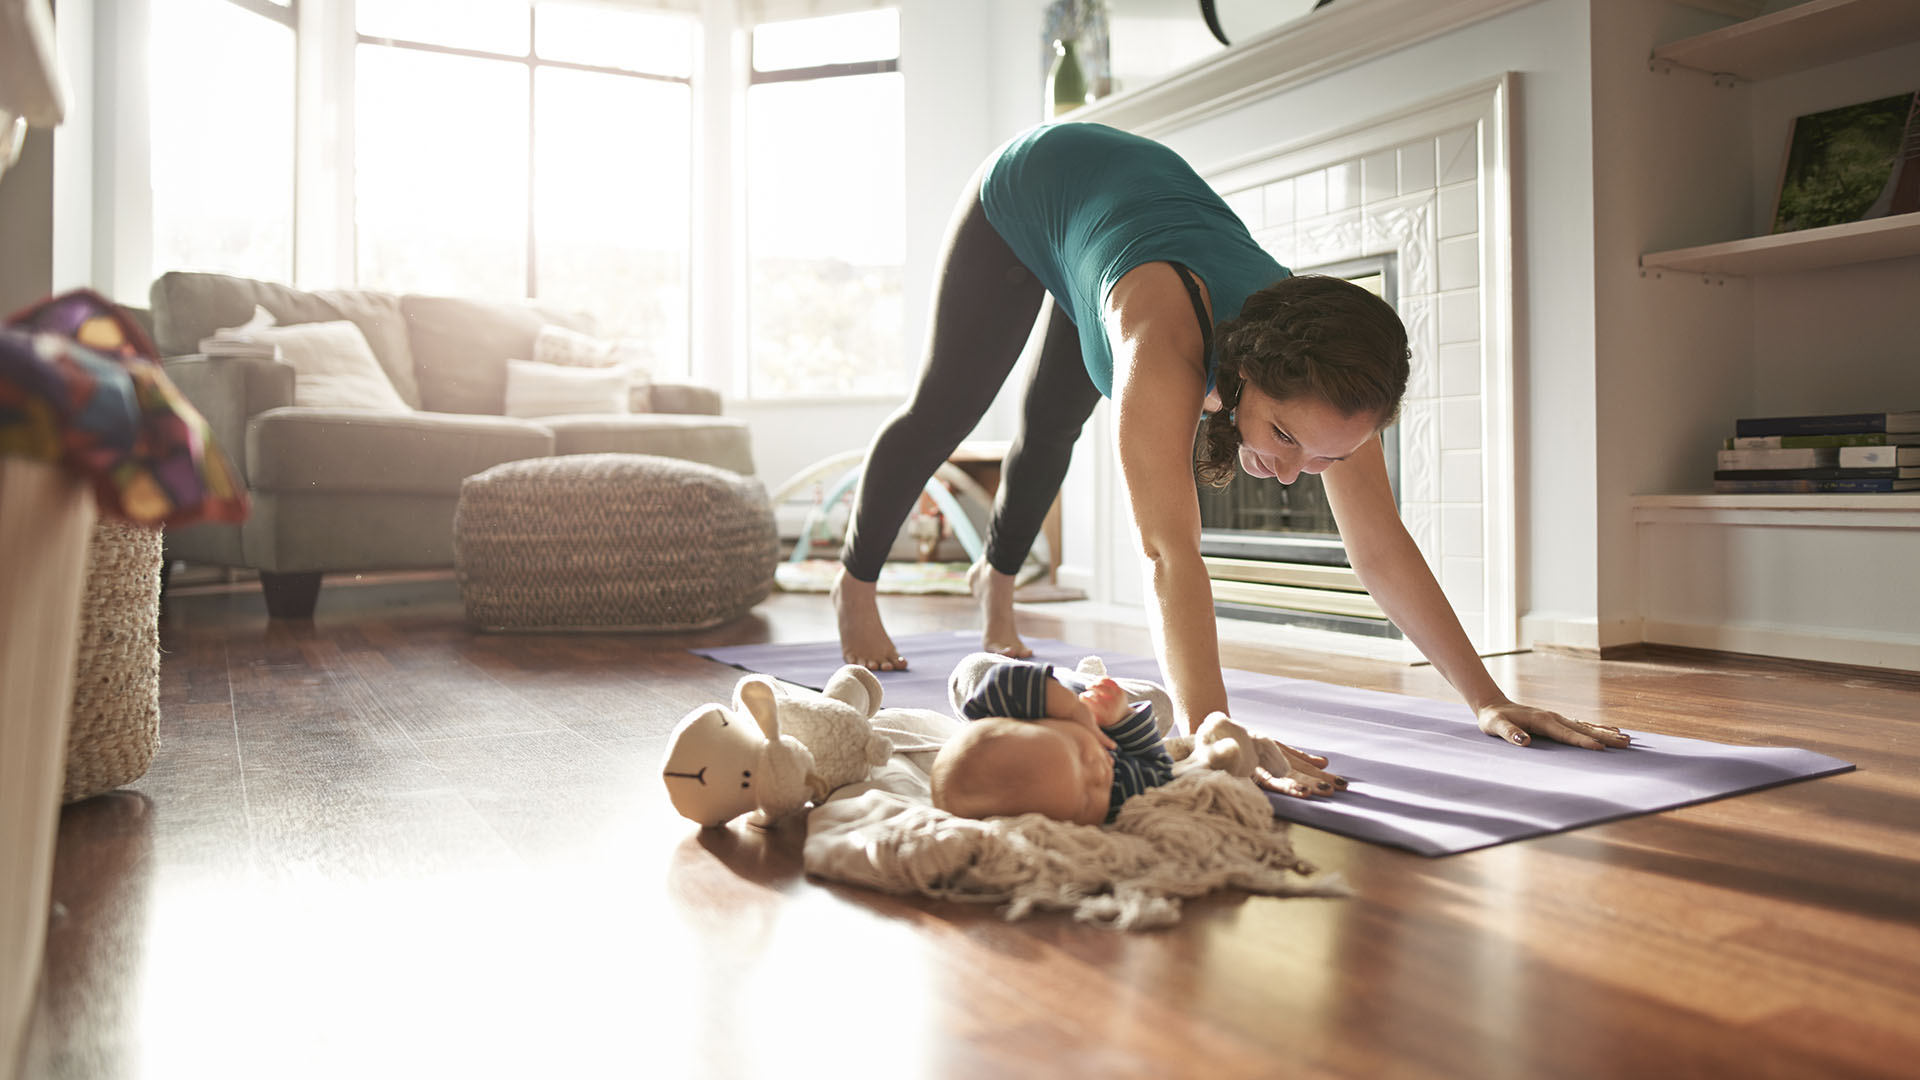 mother does yoga with baby beside her - while she is on a leave of absence for work